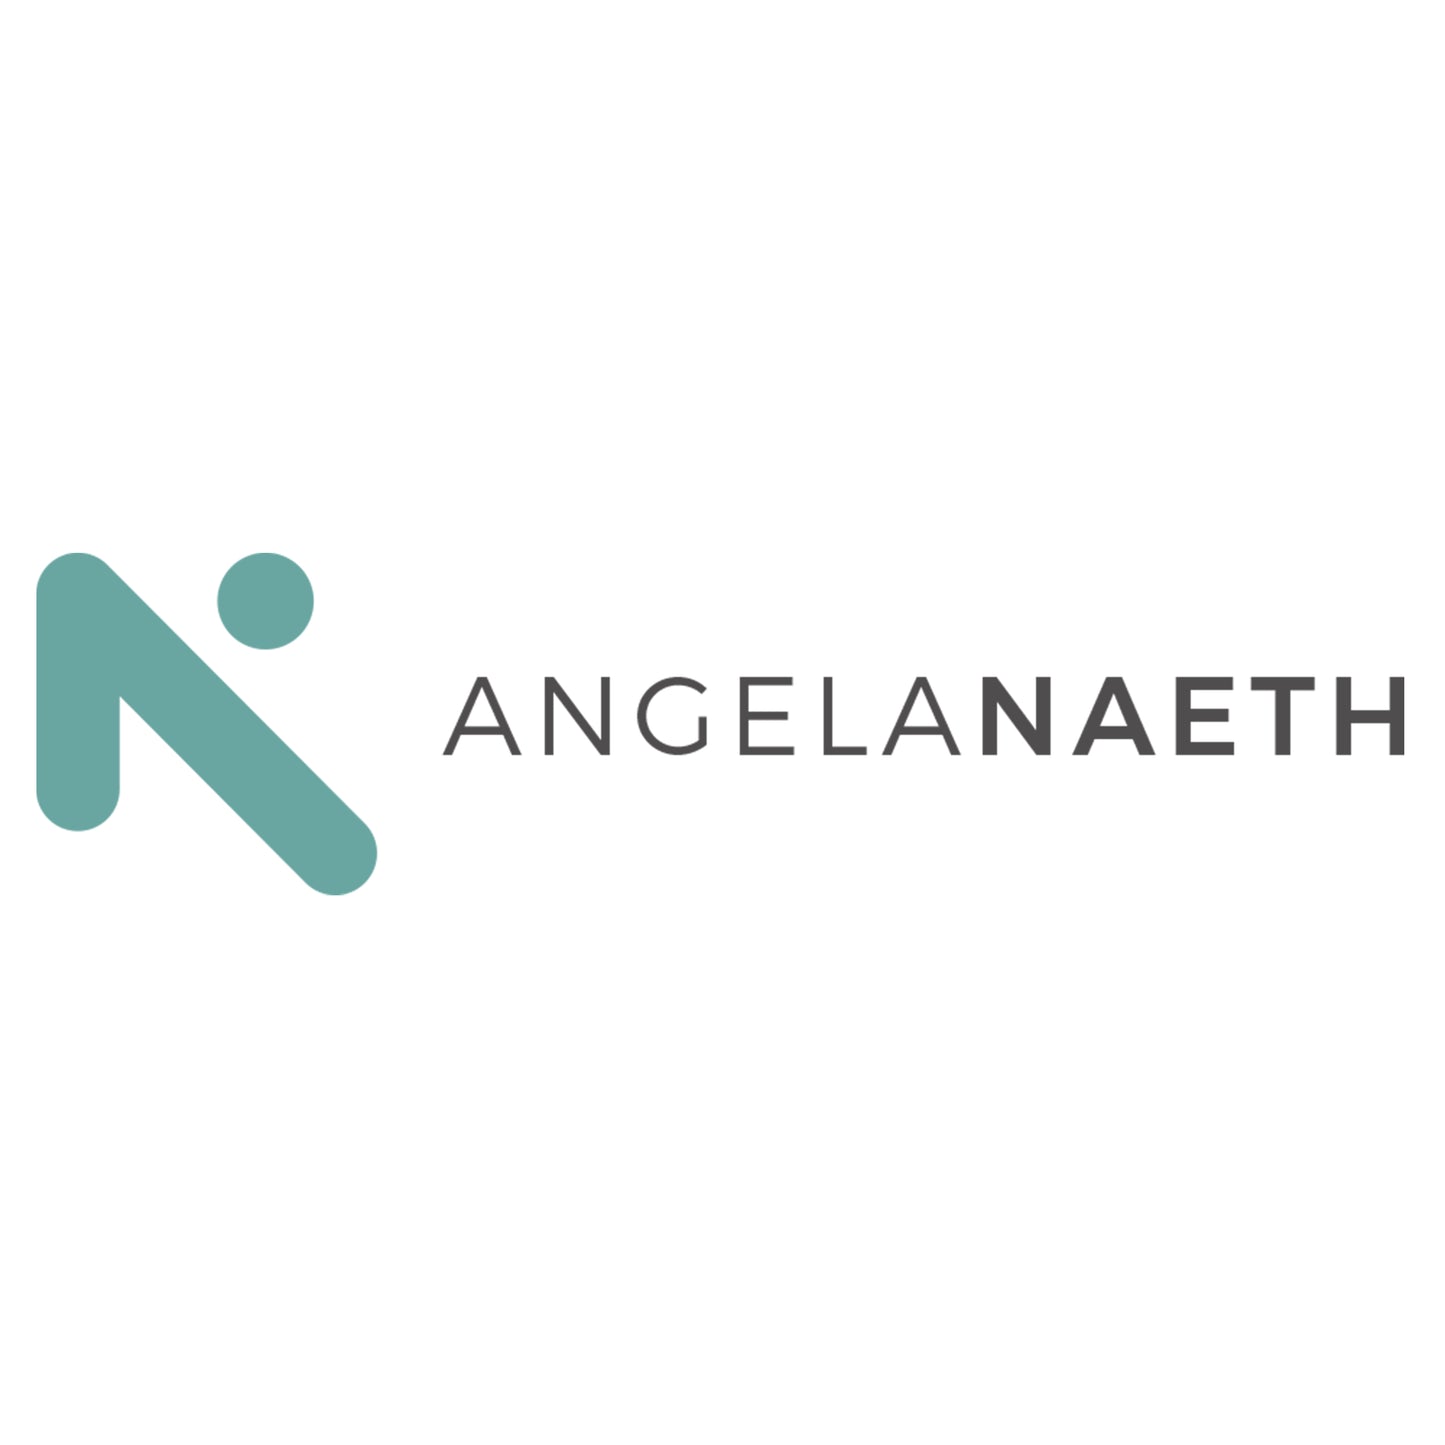 1-On-1 Coaching with Angela Naeth